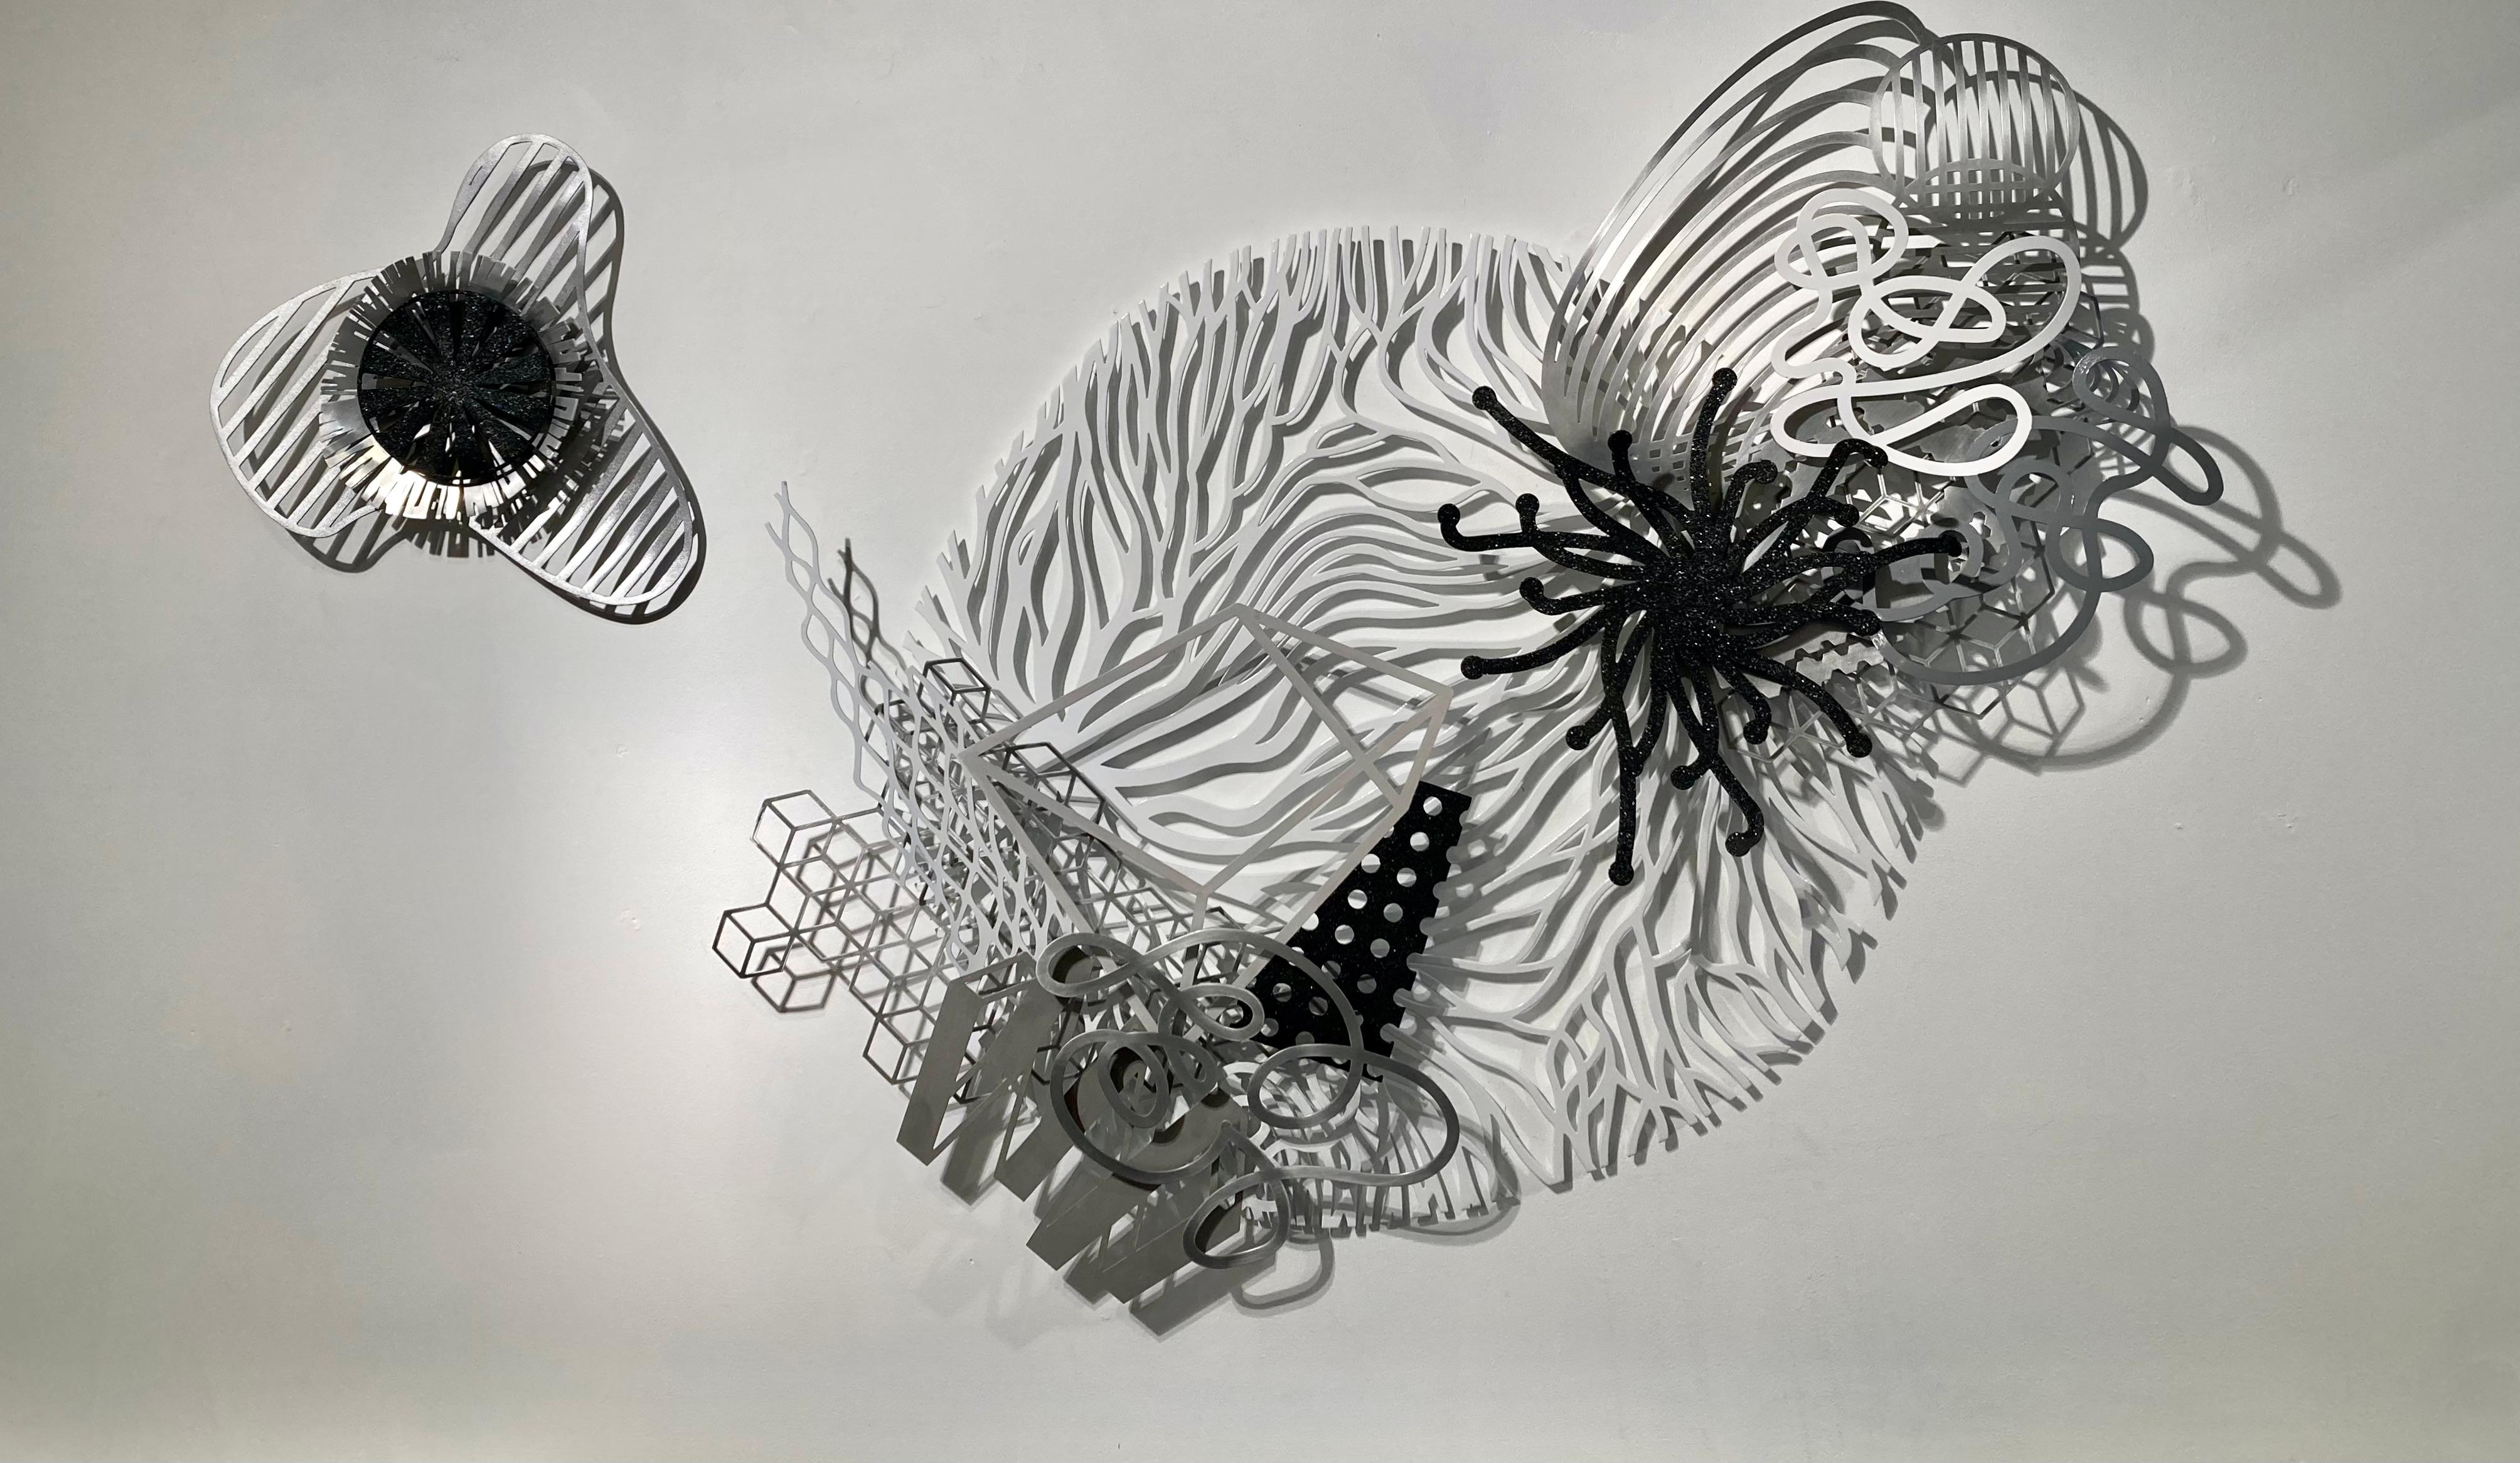 Wendy Letven Abstract Sculpture - "Crystal Cloud"  Wall Piece, Painted Metal, Silver, Chrome, White, Sparkly Black